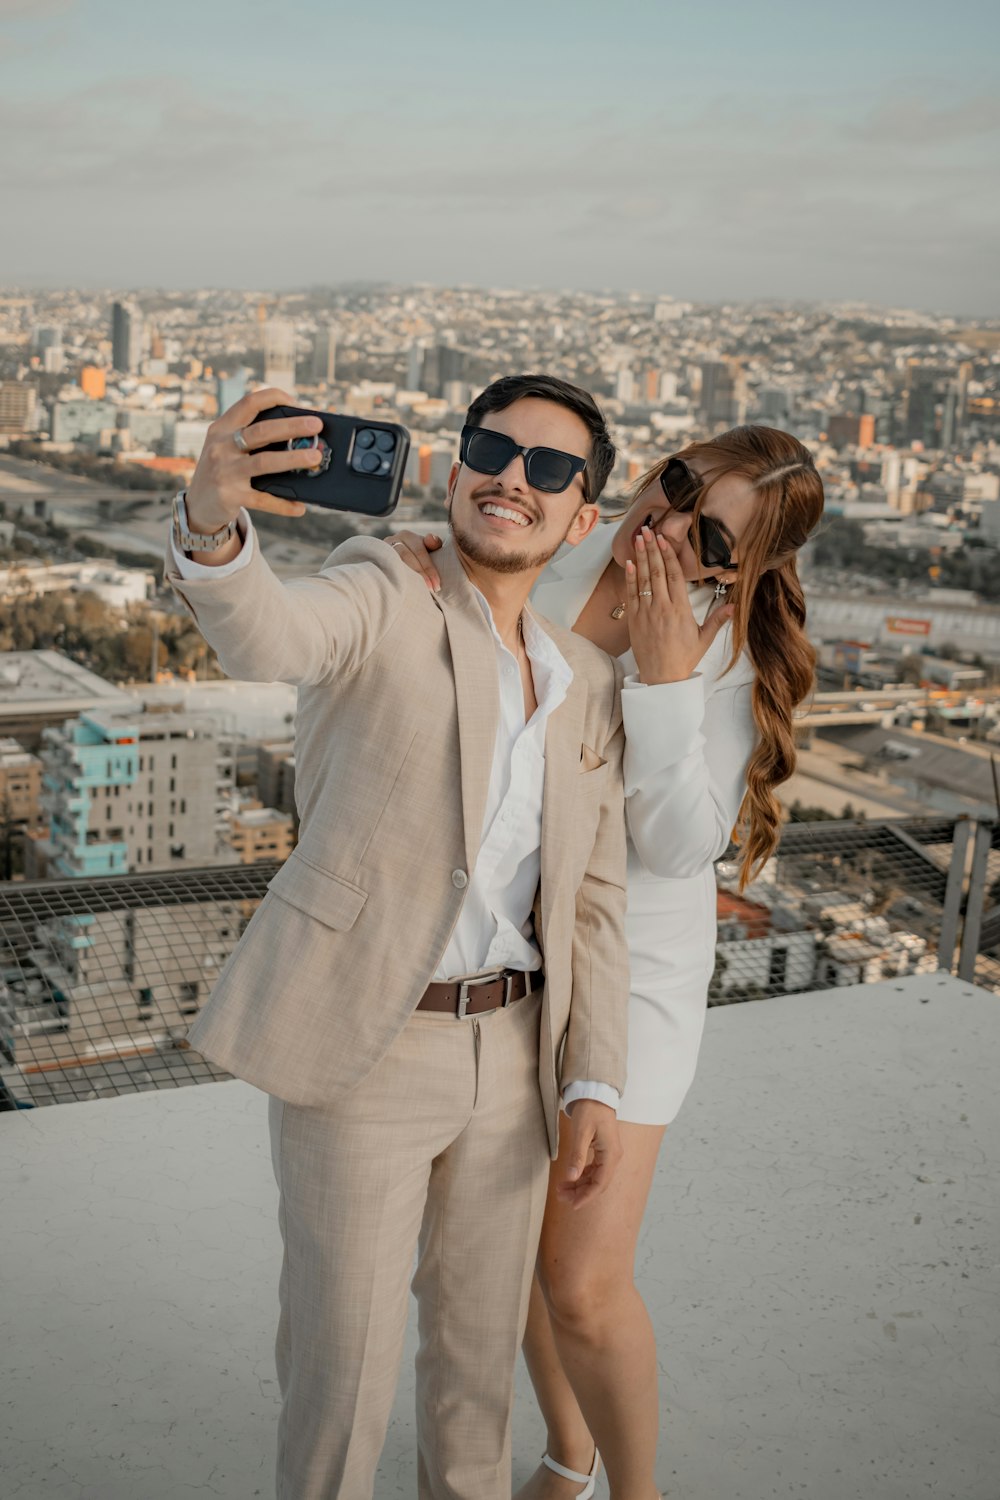 a man and woman taking a selfie on top of a building